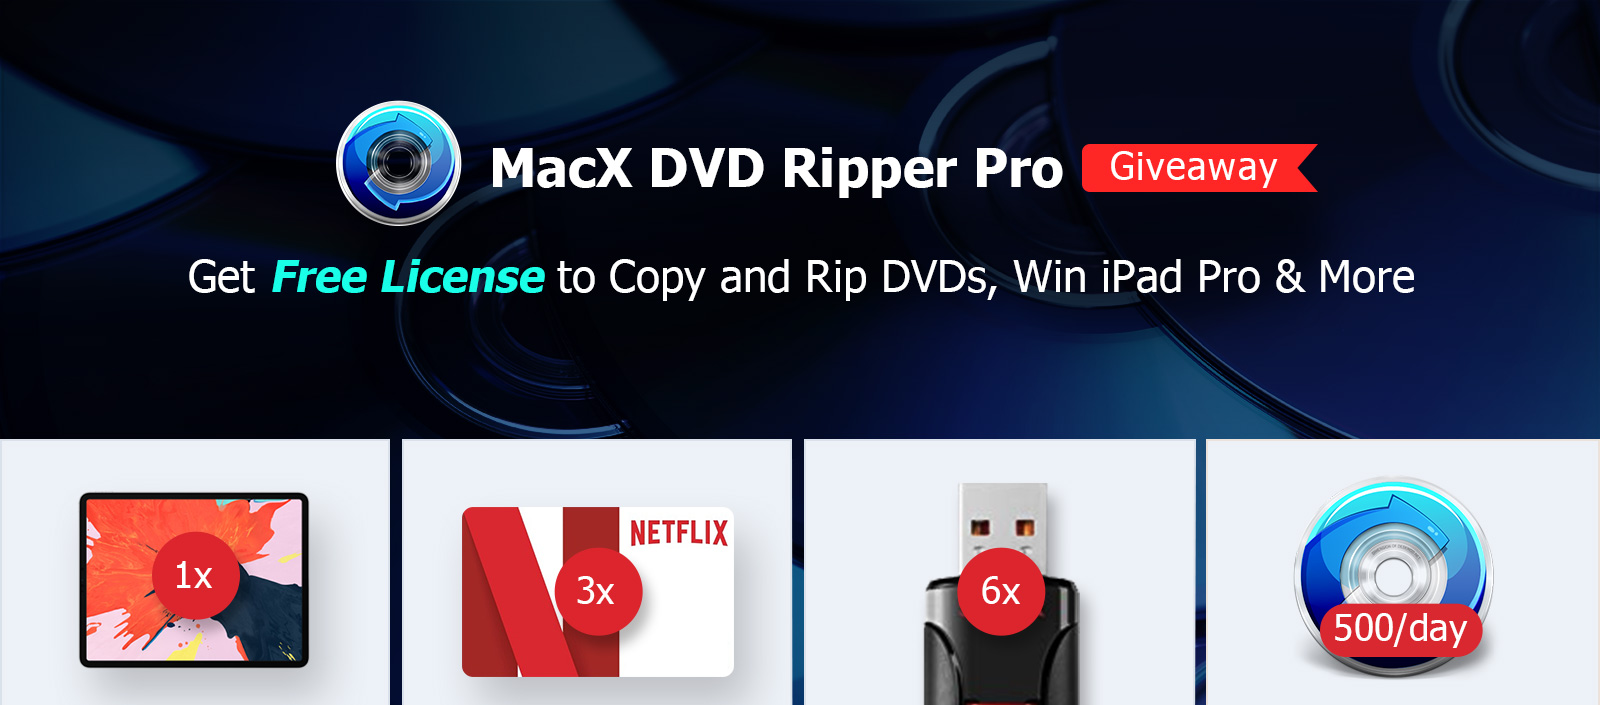 Hassle Free Guide To Copy And Rip Any Dvds With Macx Dvd Ripper